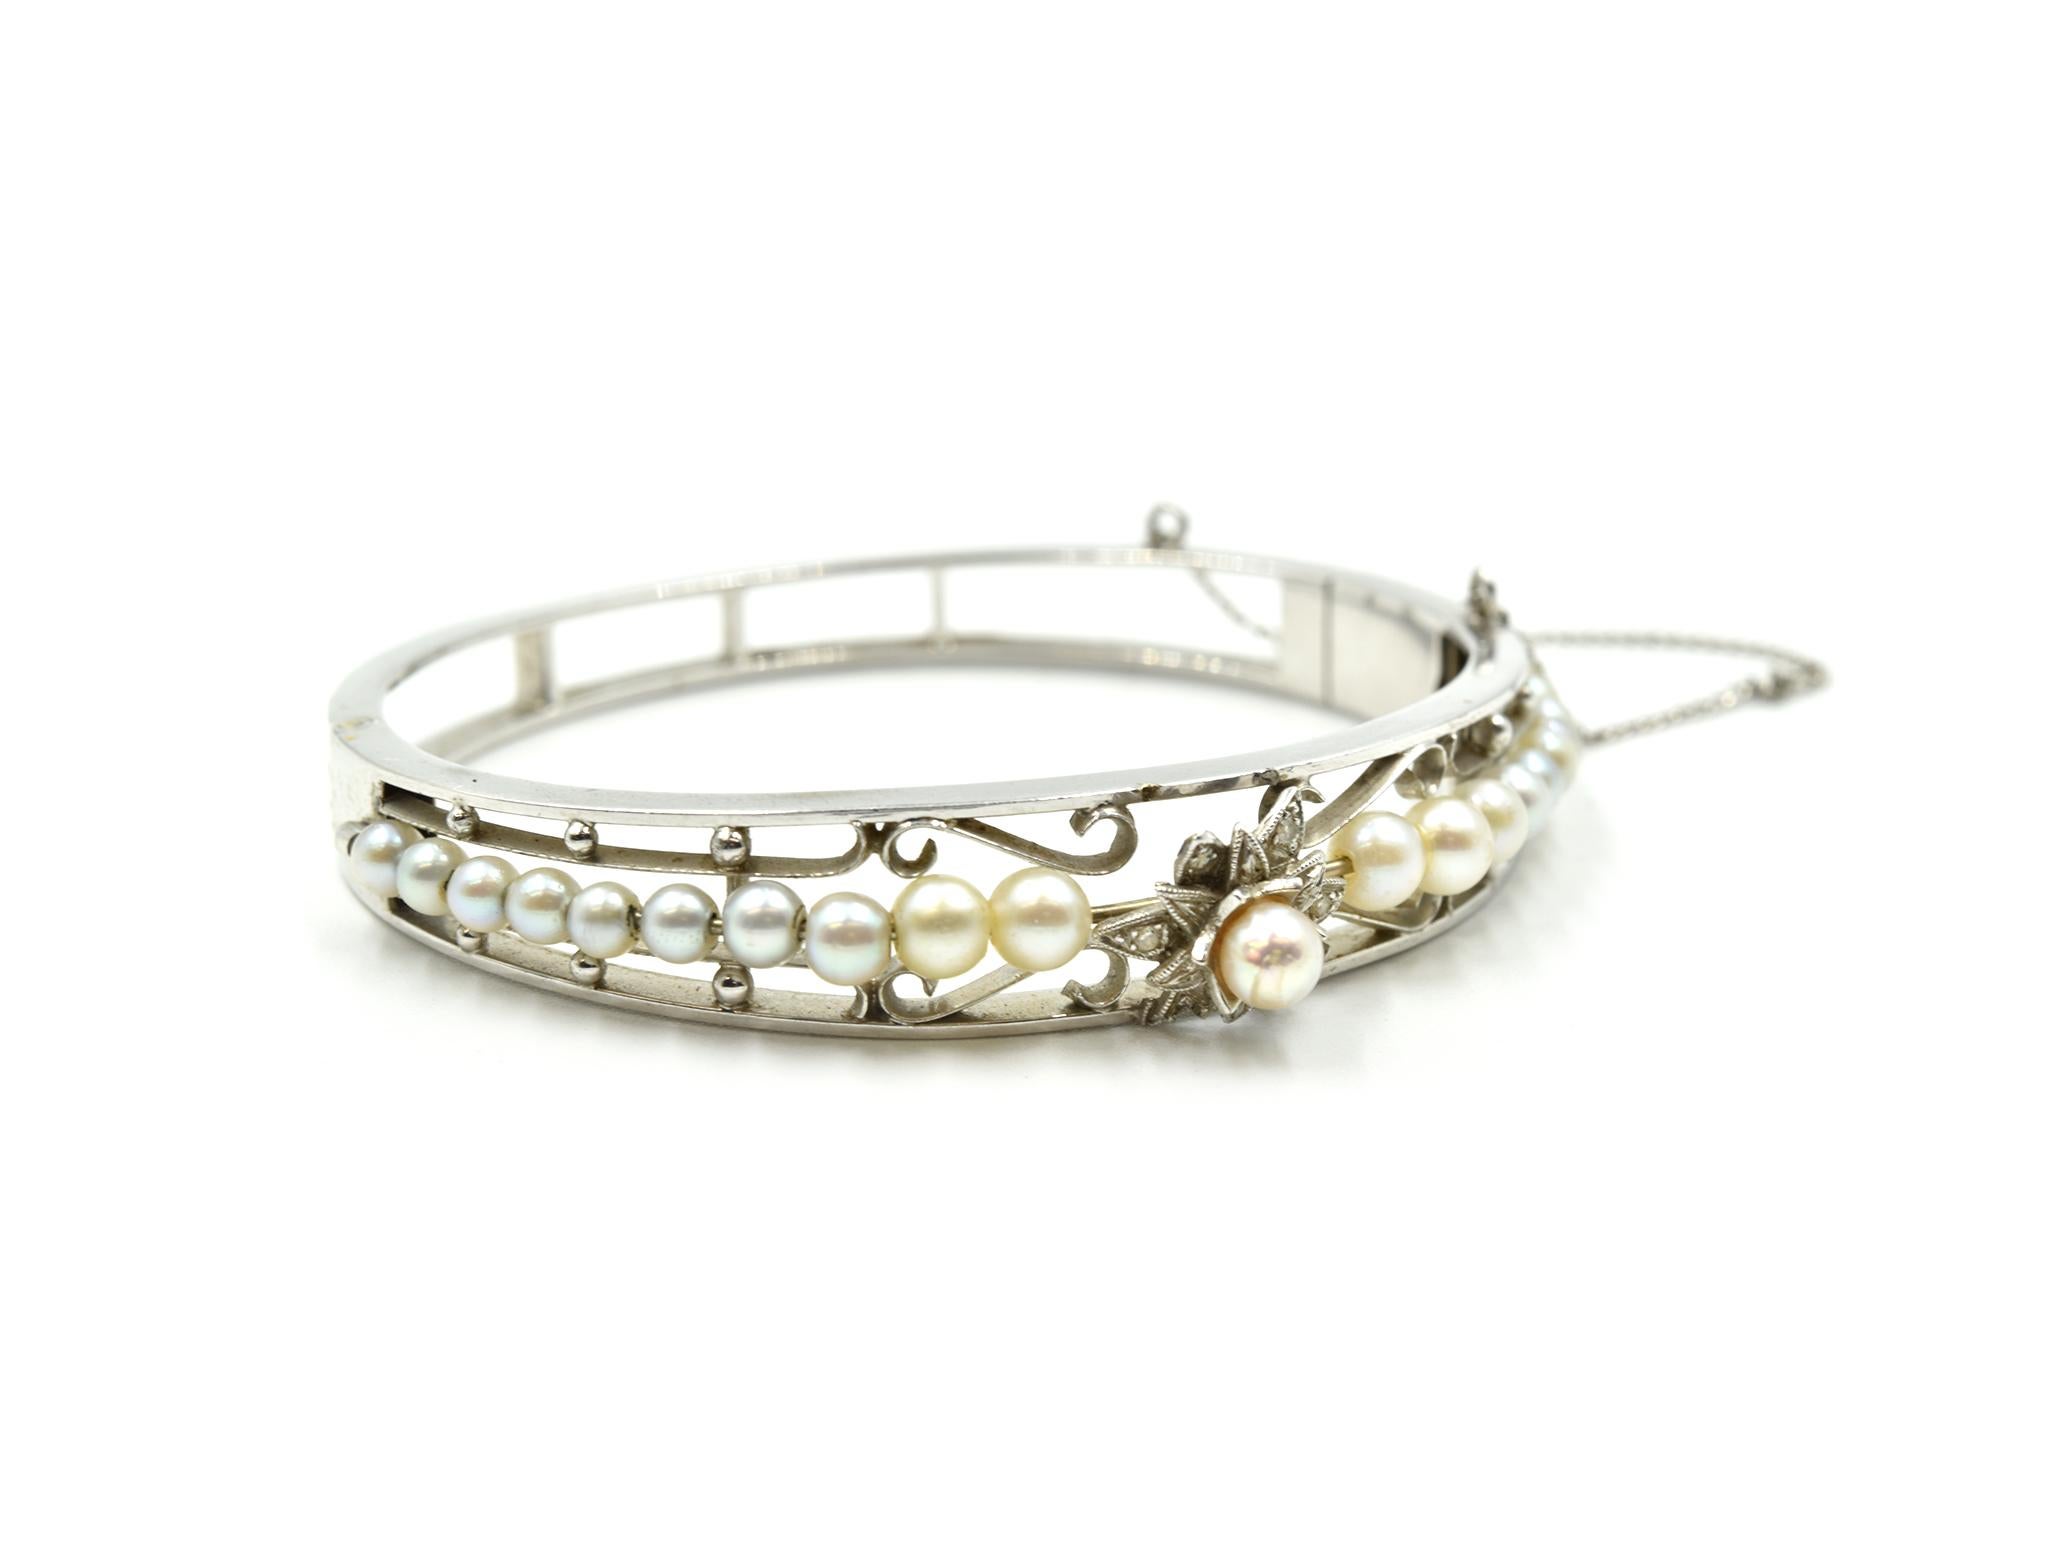 Designer: custom design
Material: 14k white gold
Pearls: round 3.40mm-4.40mm cultured pearls
Dimensions: bracelet will fit up to 6-inch wrist and is 3/8-inch wide, with 3-inch safety chain
Weight: 17.08 grams
